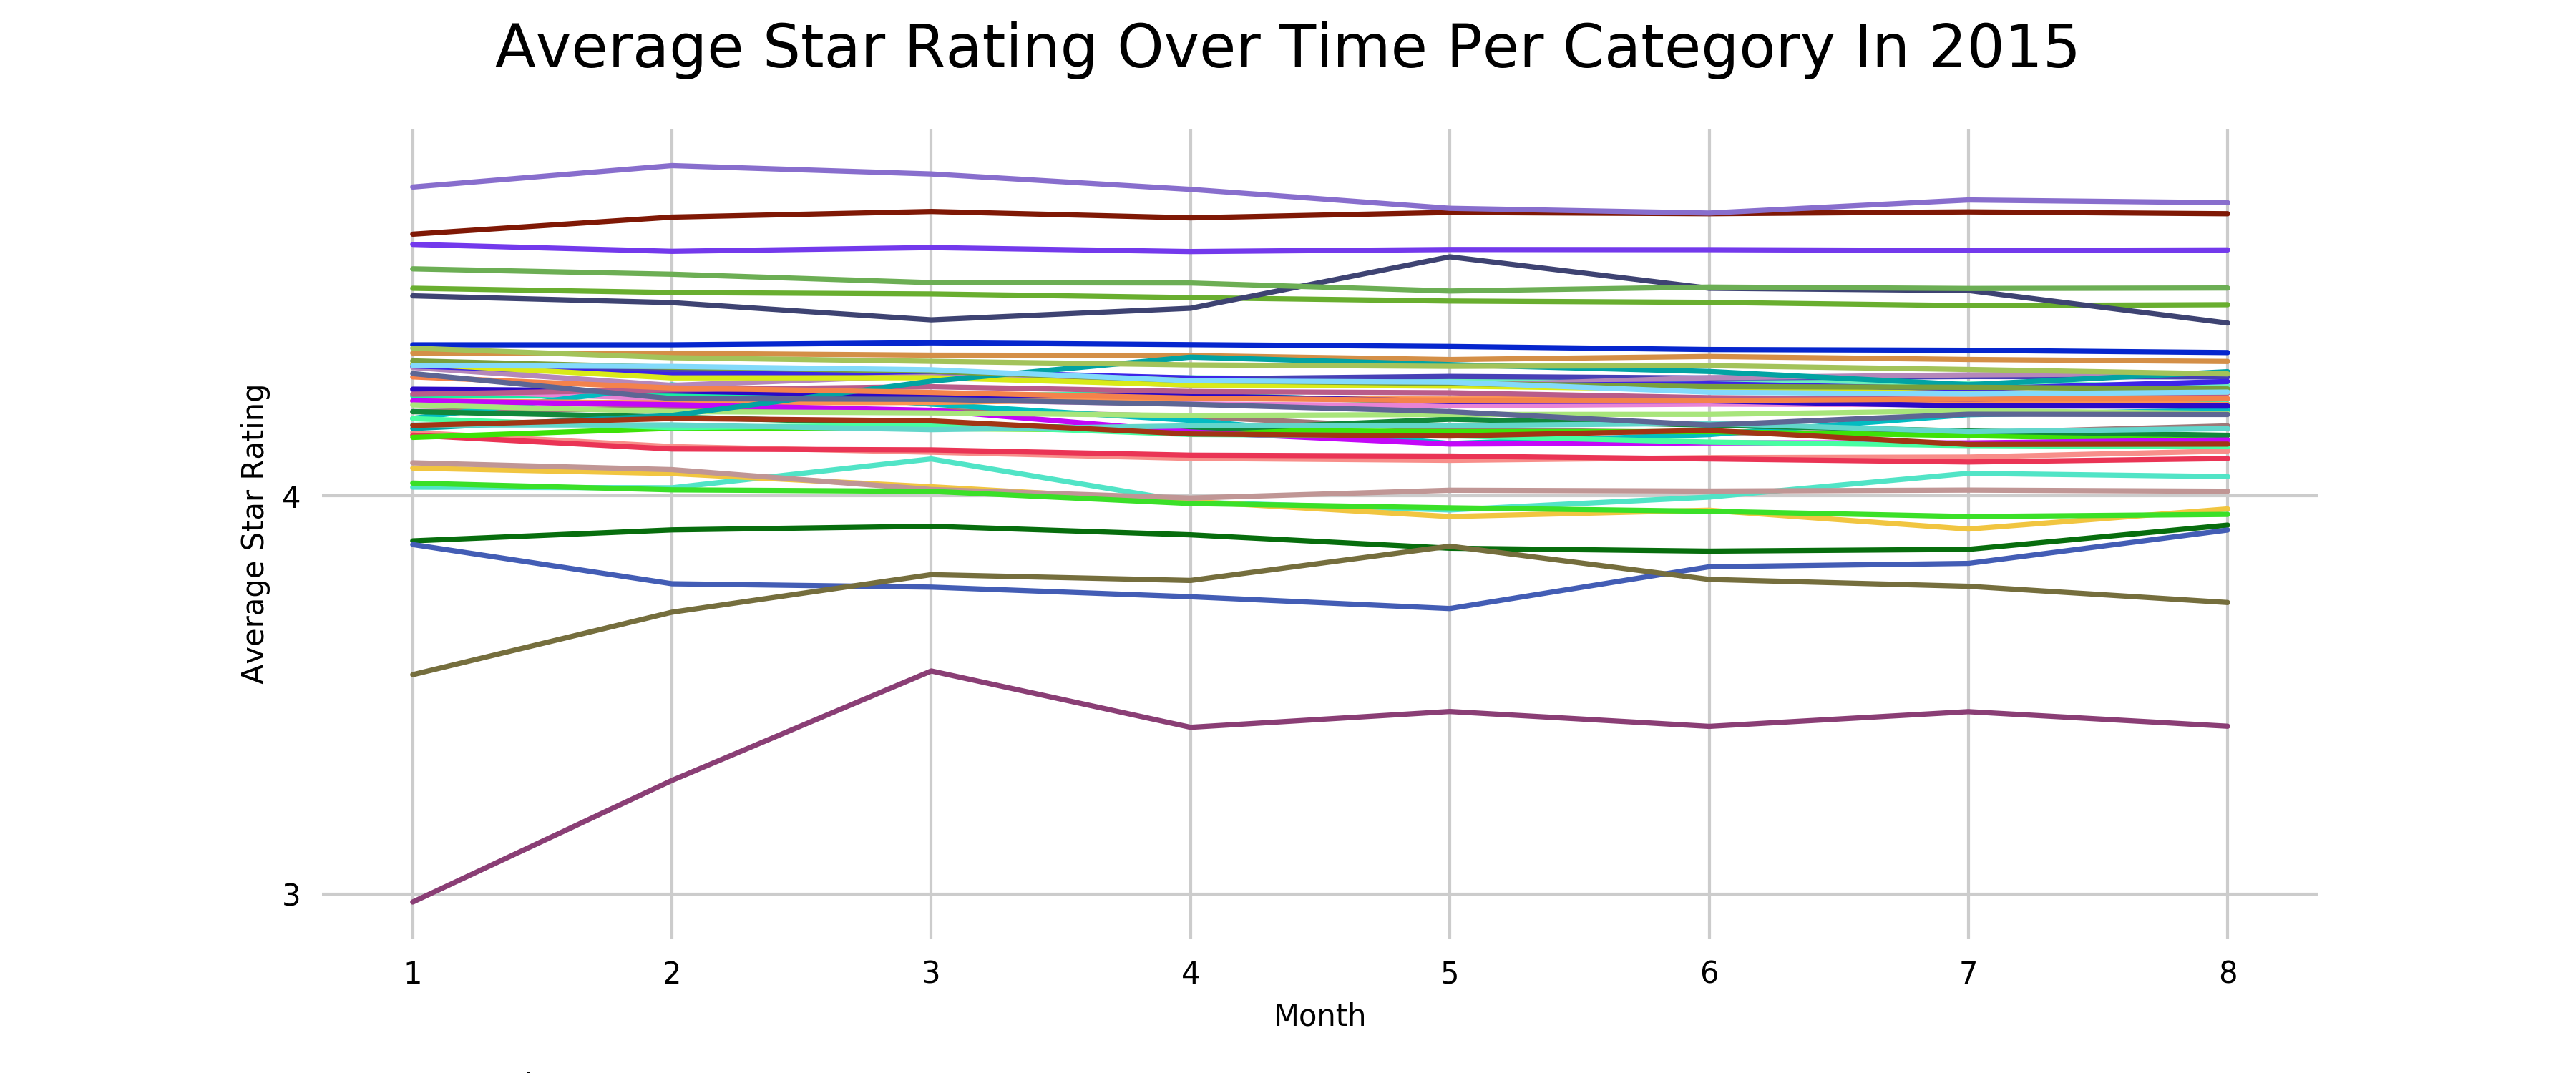 Average Star Rating over time per product category in 2015. 